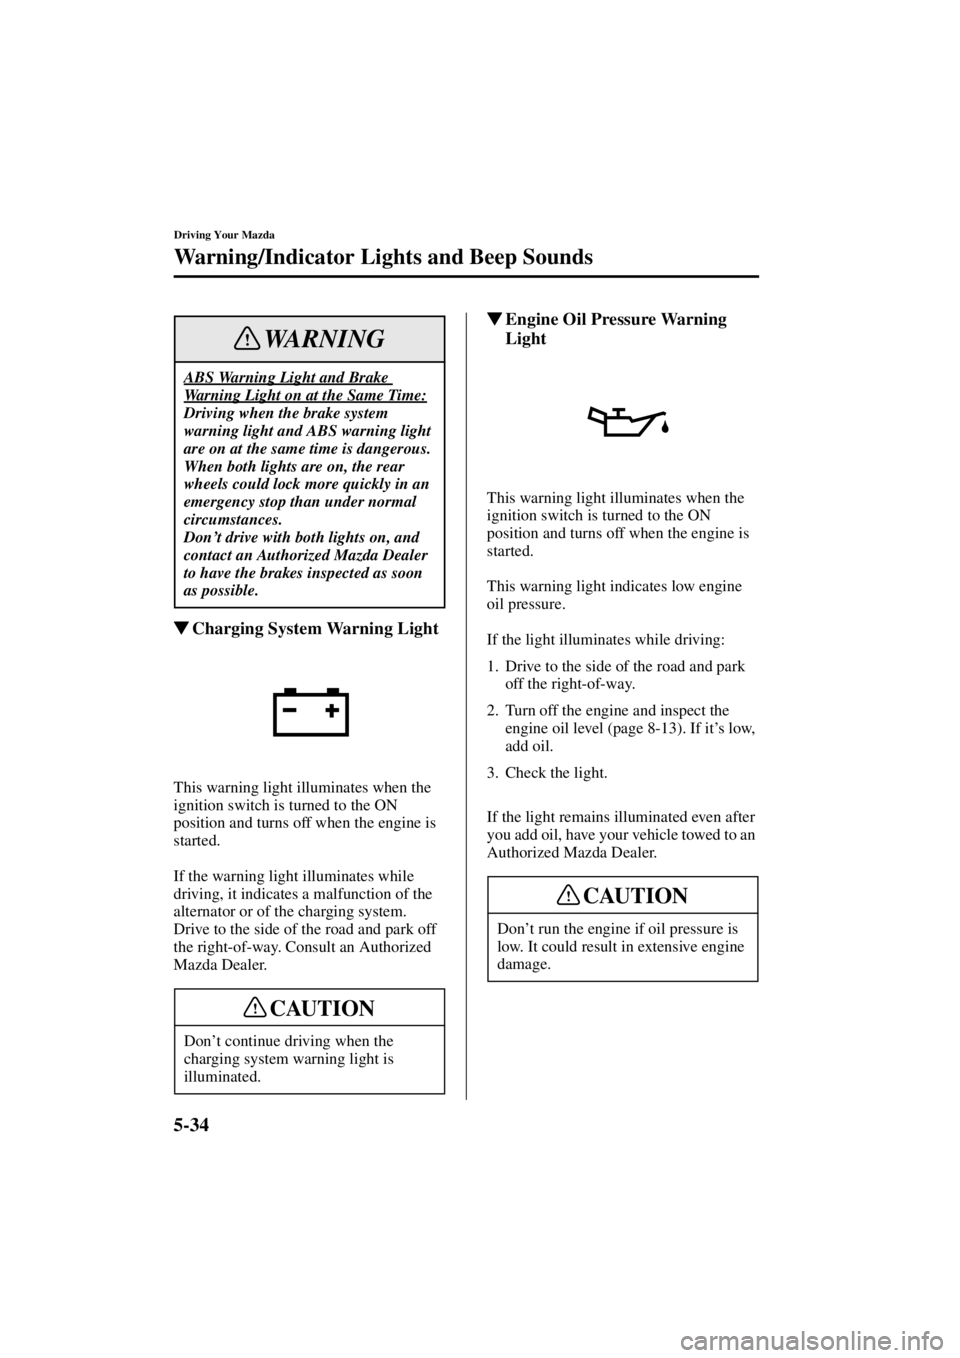 MAZDA MODEL 3 5-DOOR 2004 User Guide 5-34
Driving Your Mazda
Warning/Indicator Lights and Beep Sounds
Form No. 8S18-EA-03I
Charging System Warning Light
This warning light illuminates when the 
ignition switch is turned to the ON 
posit